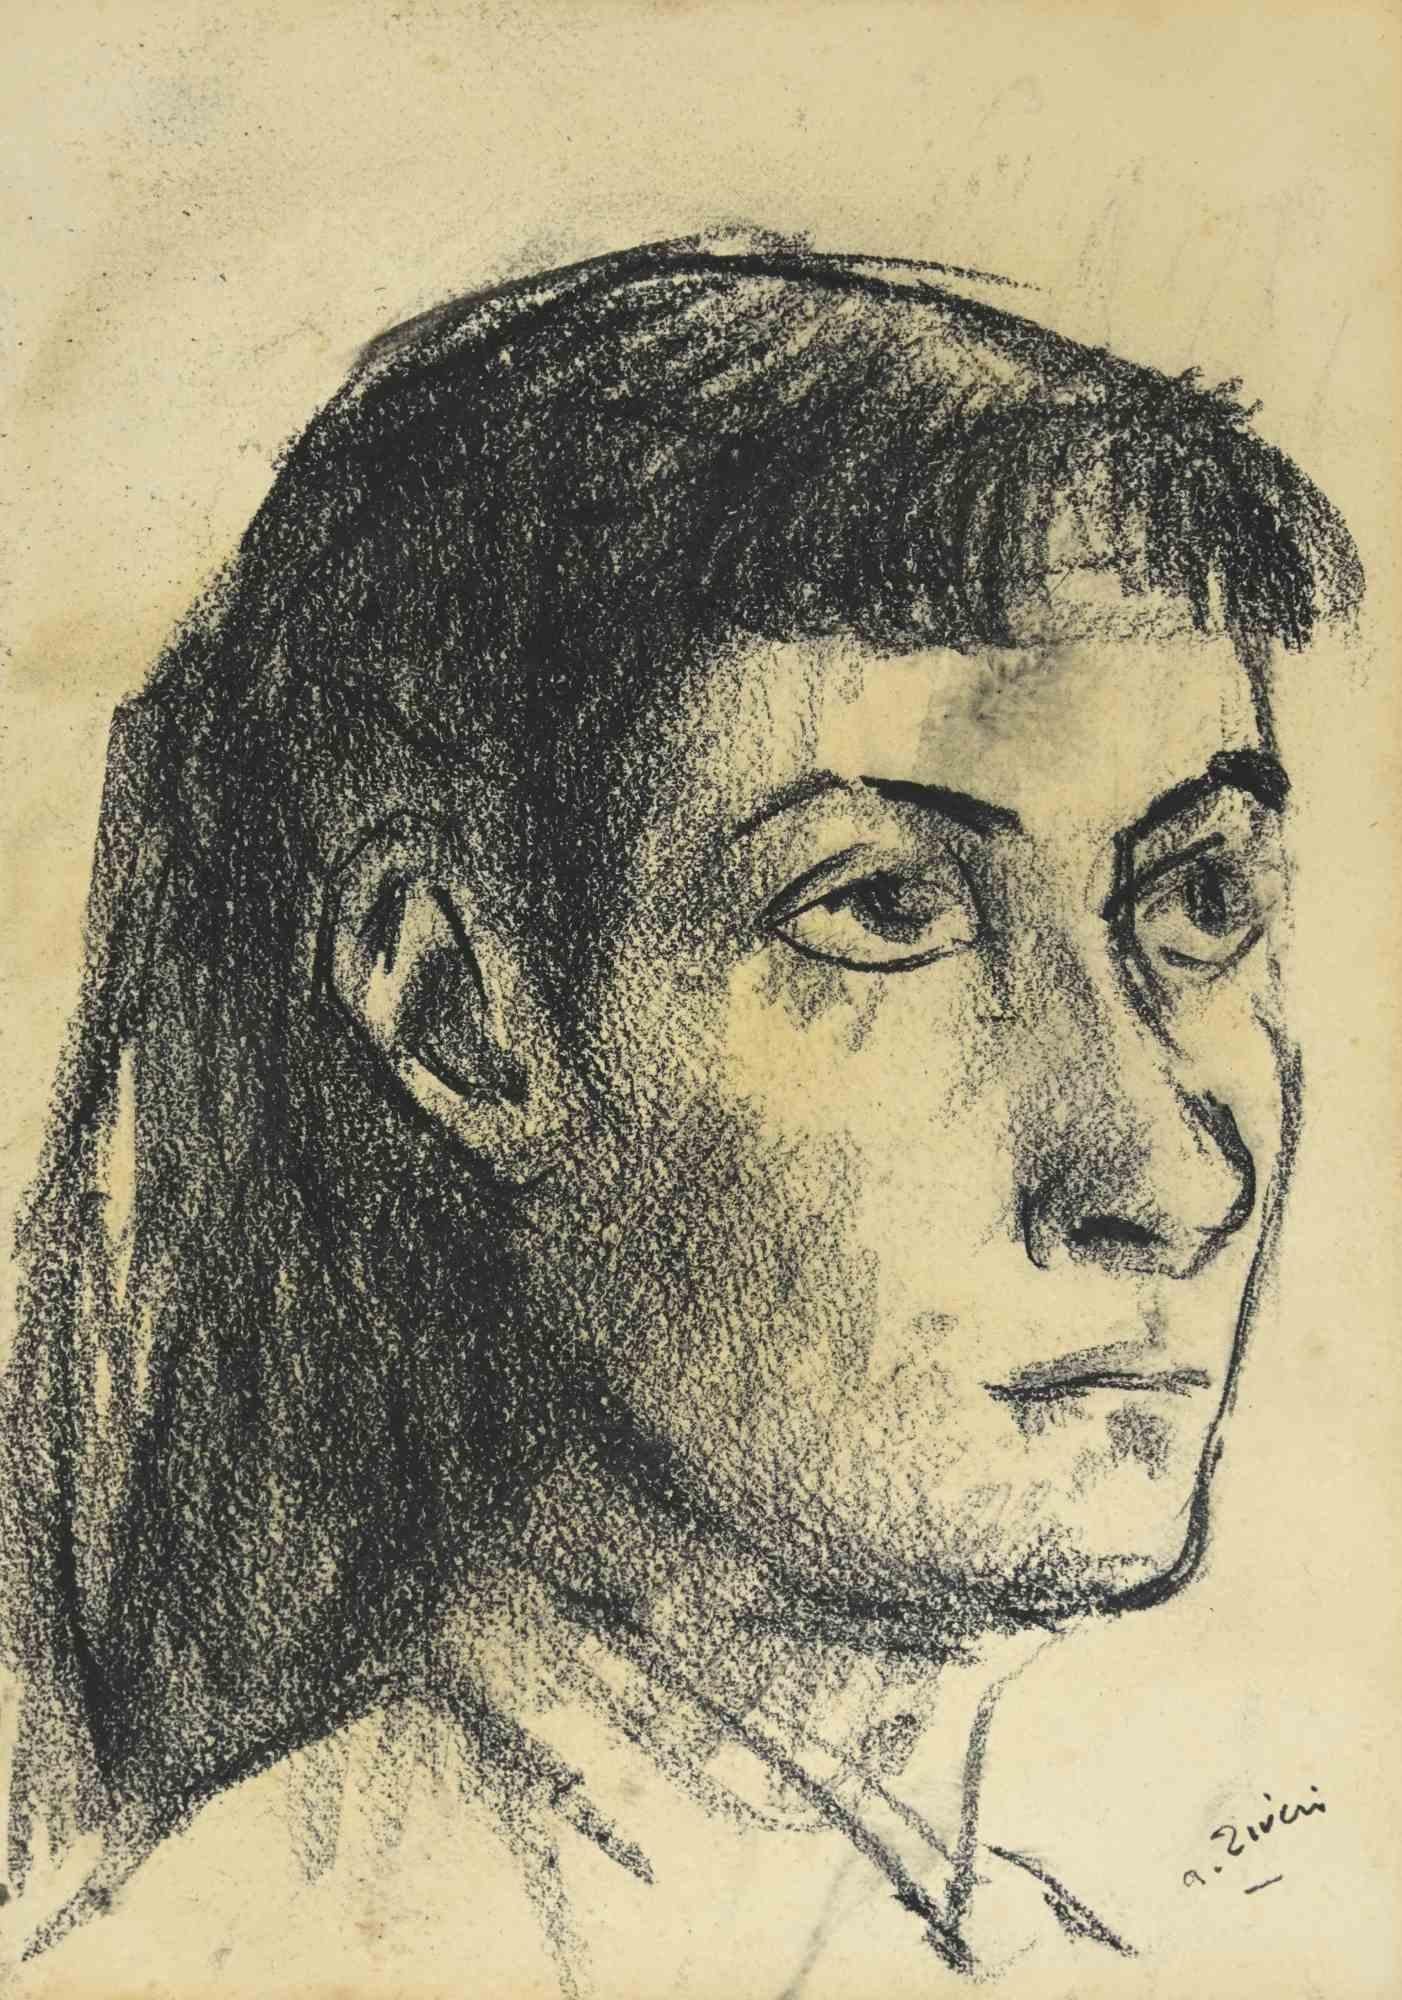 Portrait is a drawing realized by Alberto Ziveri in the 1930s.

Charcoal on paper.

Hand-signed.

In good conditions.

The artwork is represented through deft strokes masterly.

Alberto Ziveri (Rome,1908 – 1990), the Italian painter of the Roman